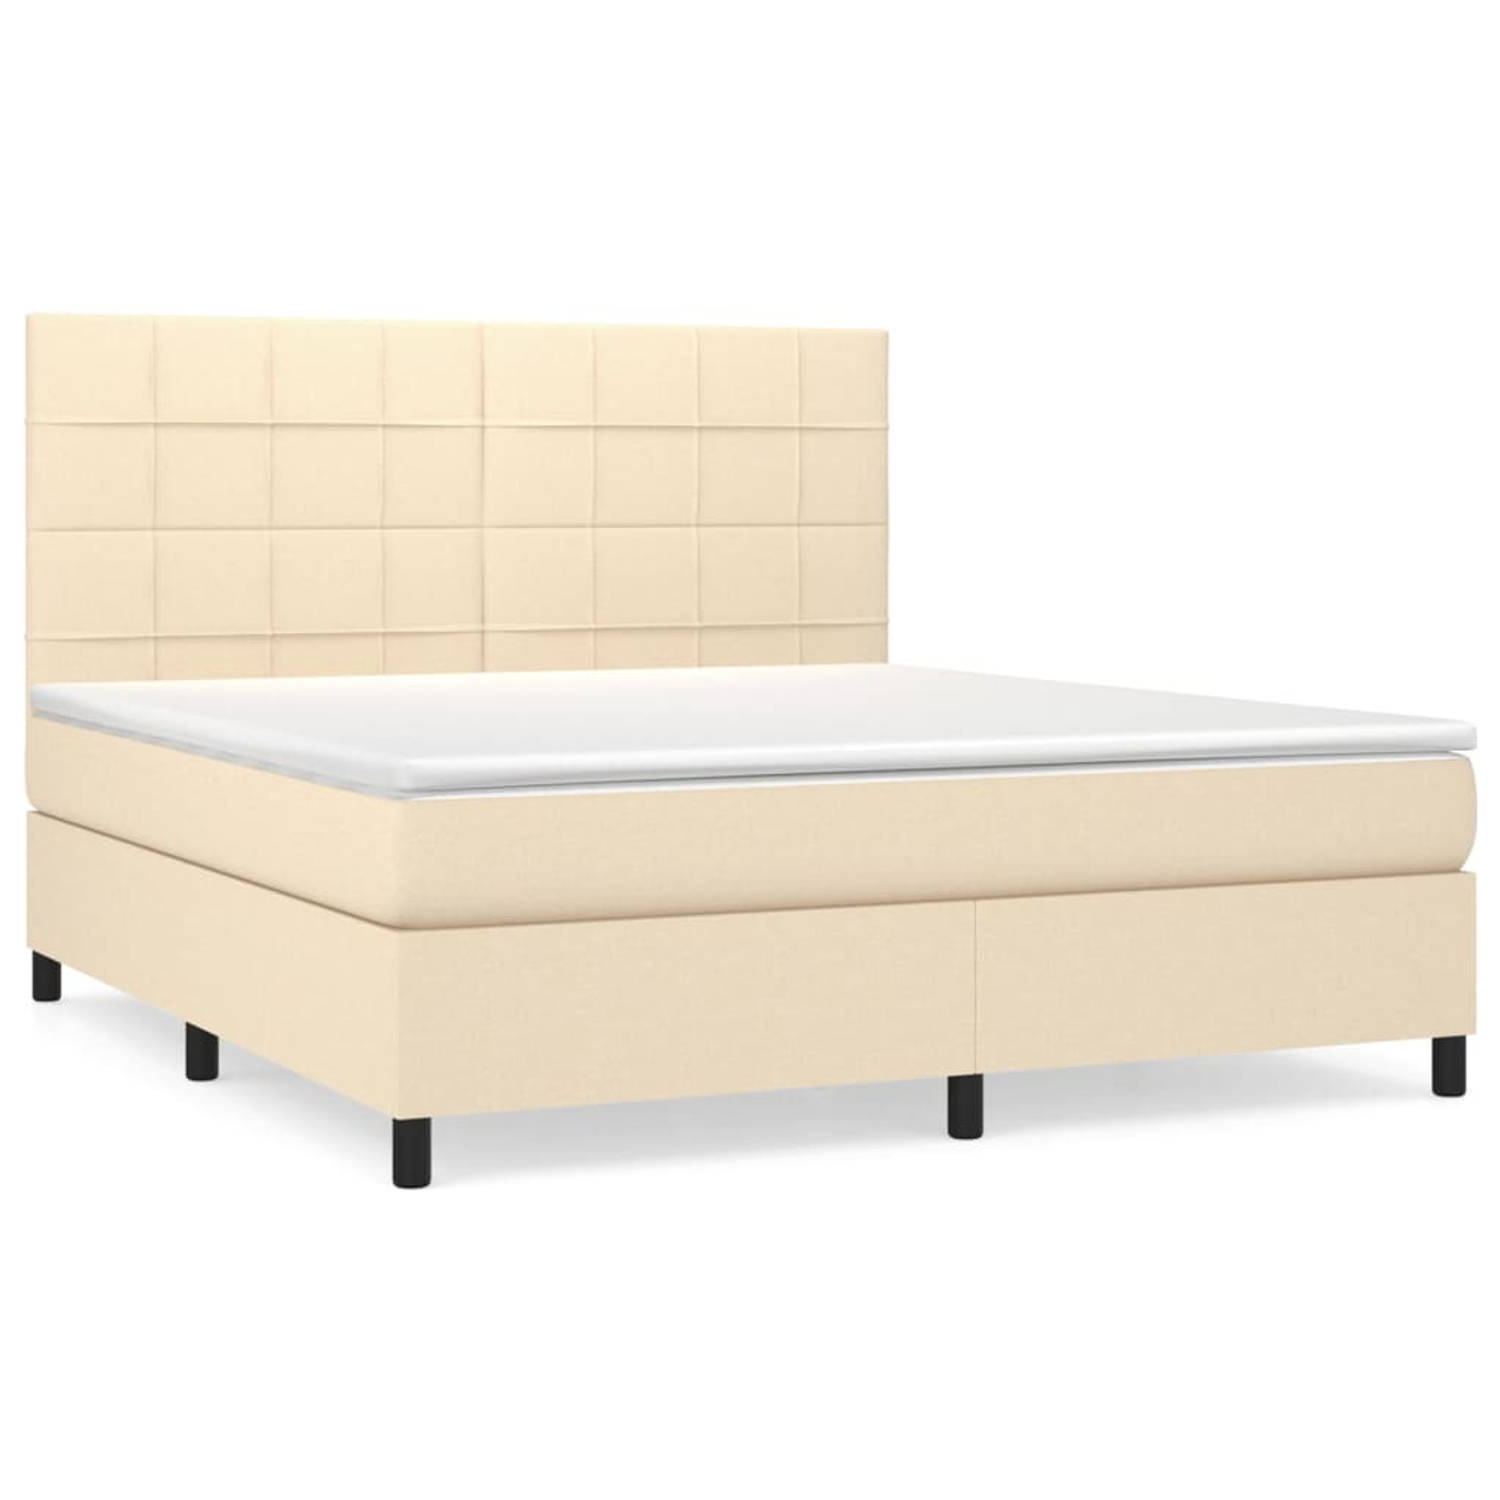 The Living Store Boxspring Bed - Standaard - 160 x 200 cm - Duurzaam materiaal